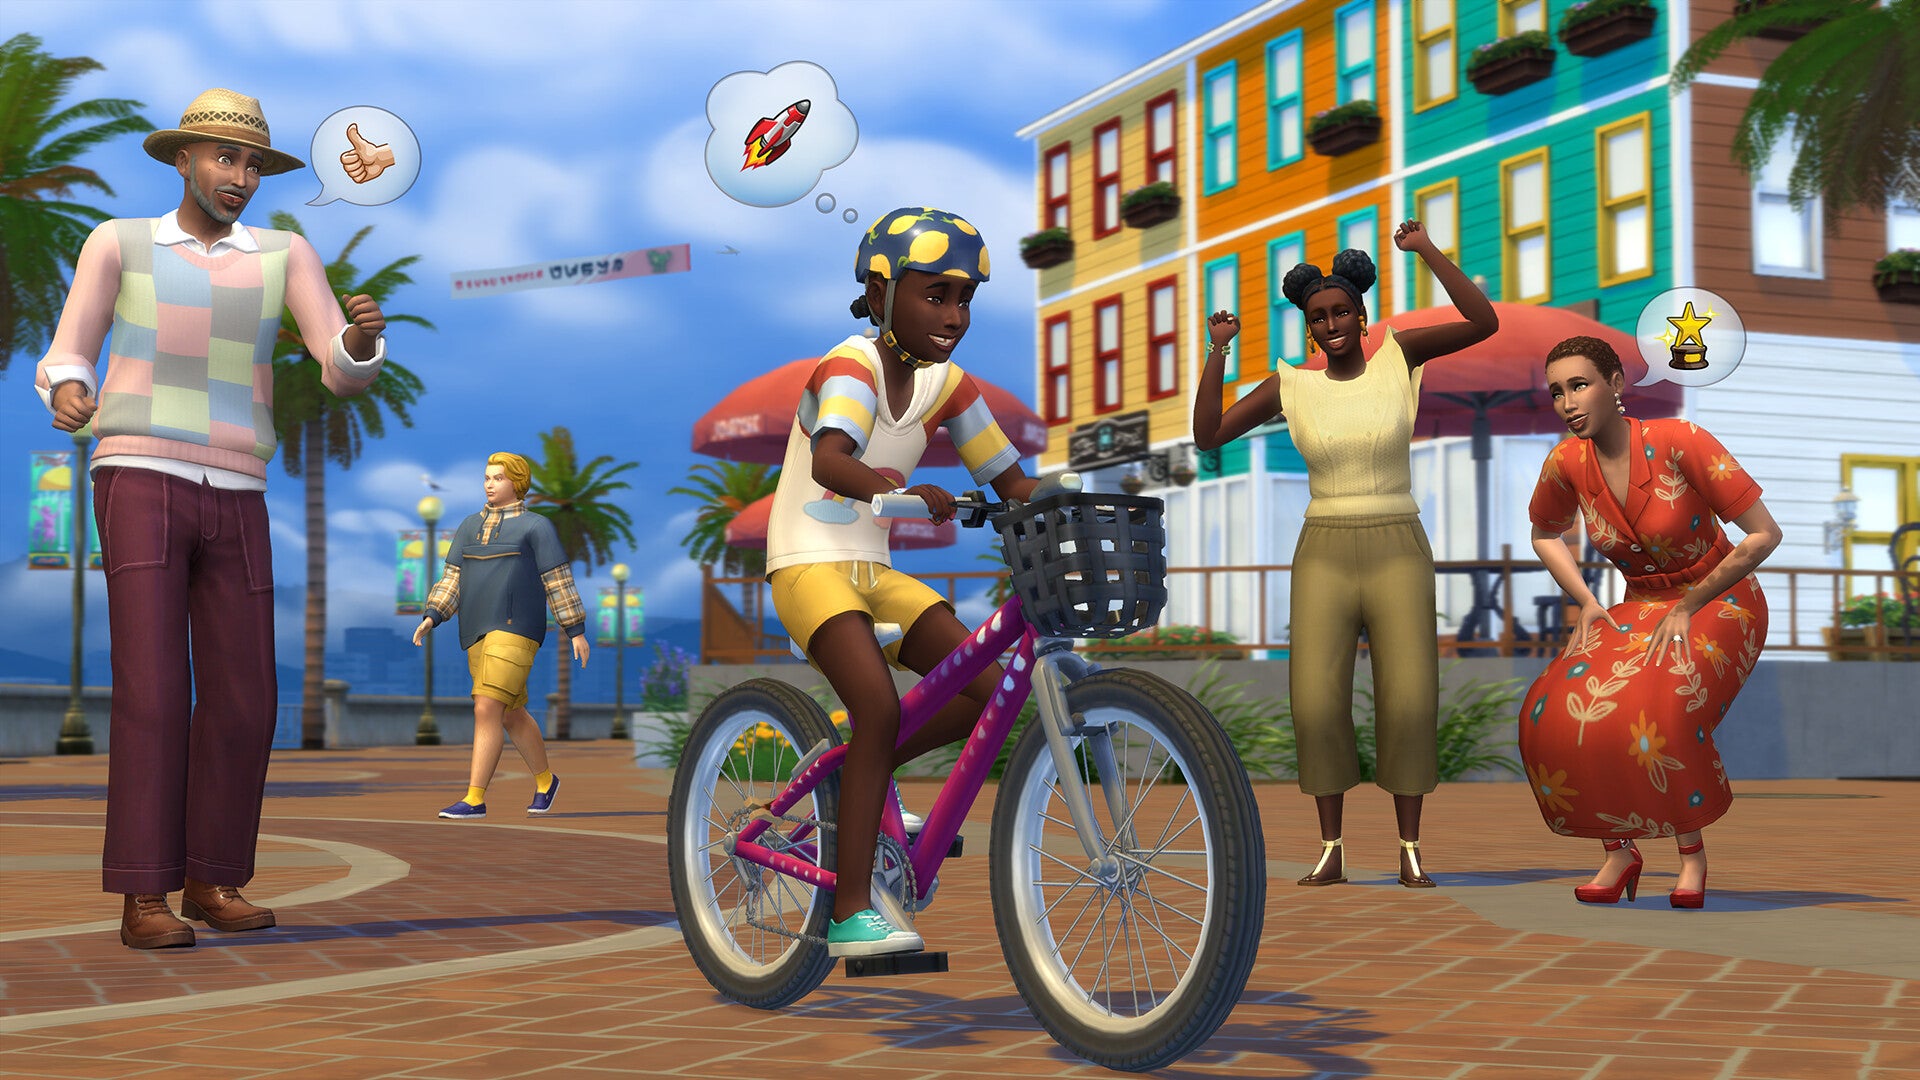 Take a closer look at The Sims 4's Growing Together expansion in new gameplay trailer 2